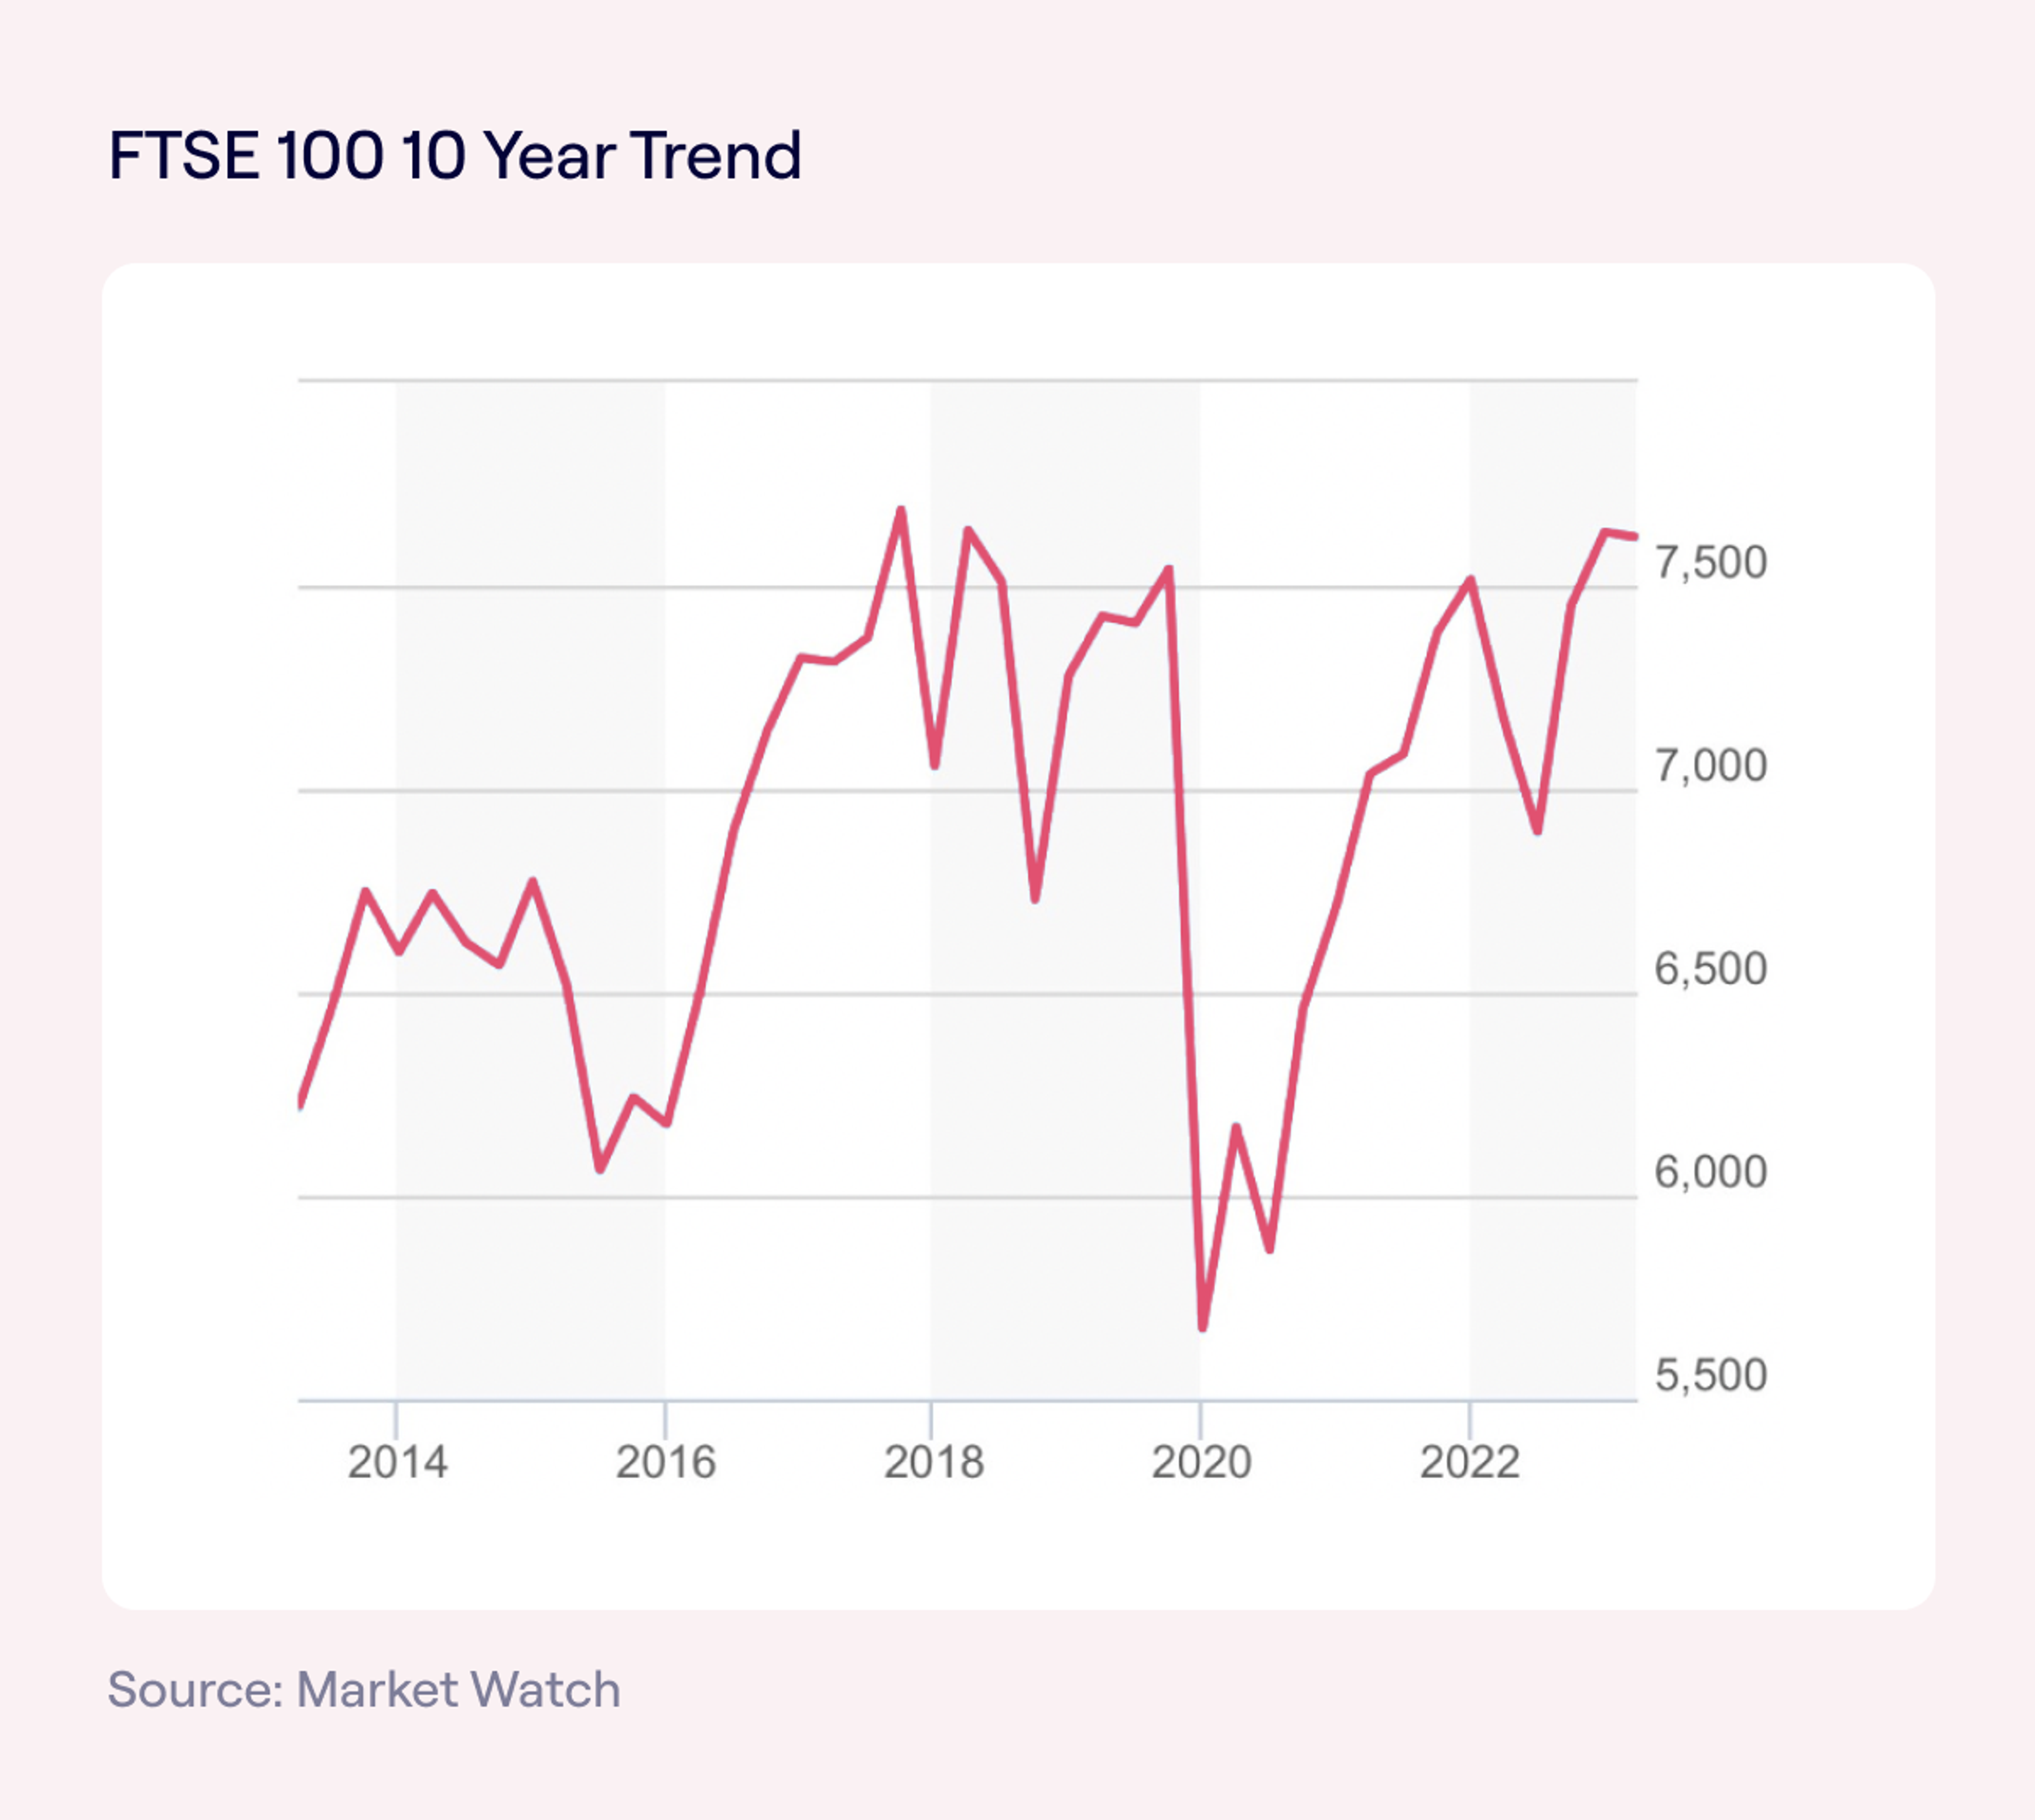 FTSE100 10 Year Trend